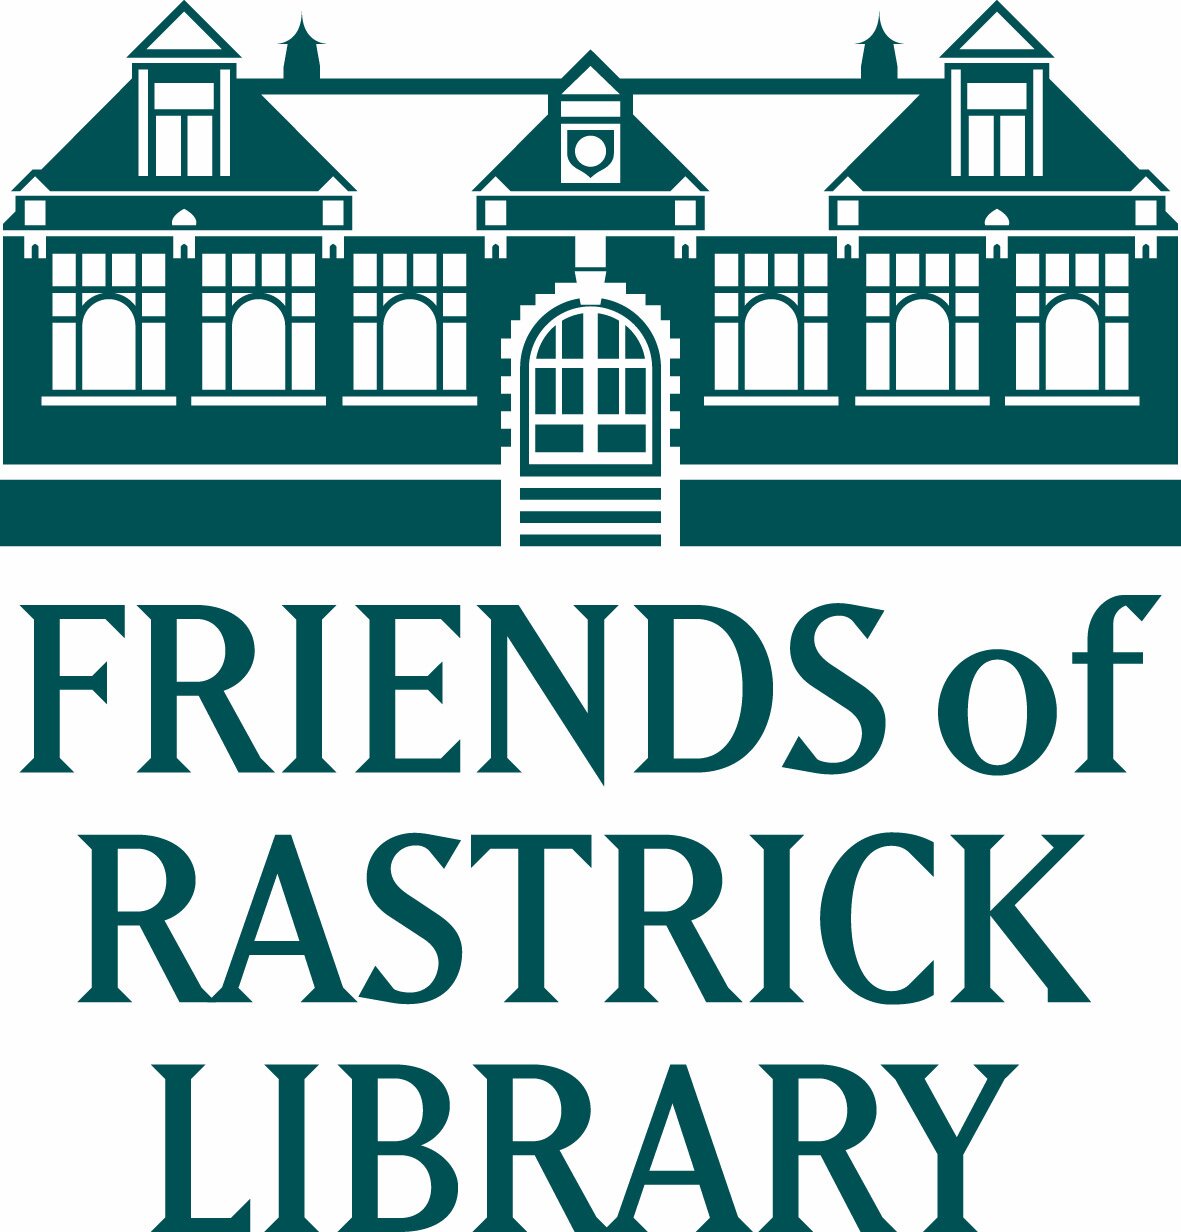 A group set up to support and promote the use of Rastrick Library. We also organise events & activities to raise funds for better disabled access to the library